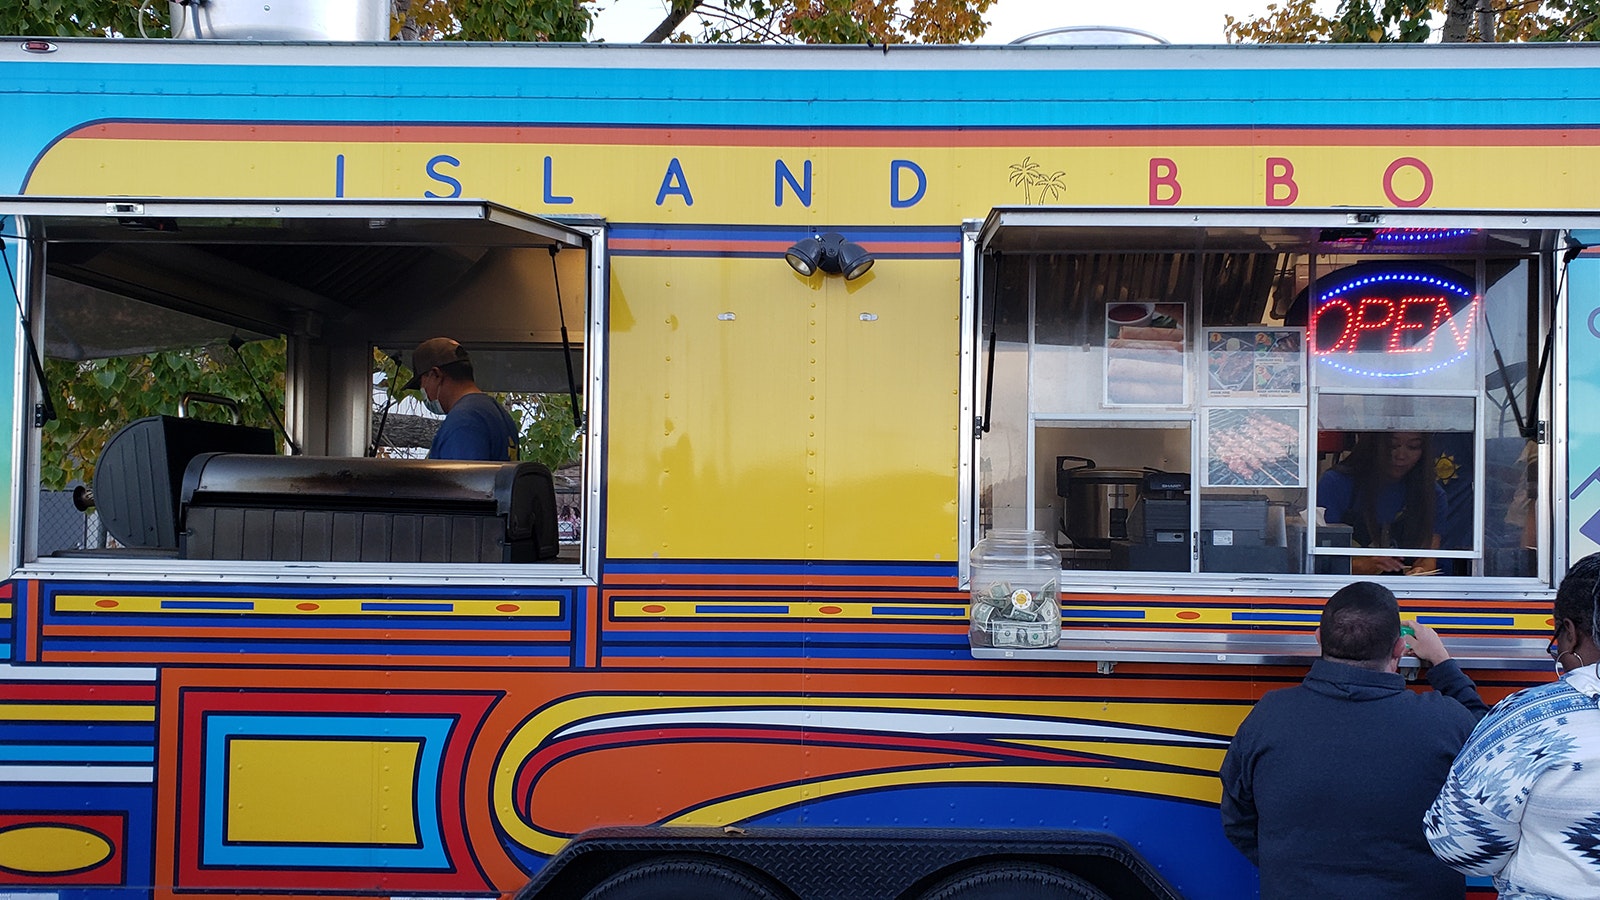 Island Barbecue stopped in at the Taste of Wyoming Food truck Festival and Vendor Showcase in Rawlins on its drive home from Laramie to Pinedale.